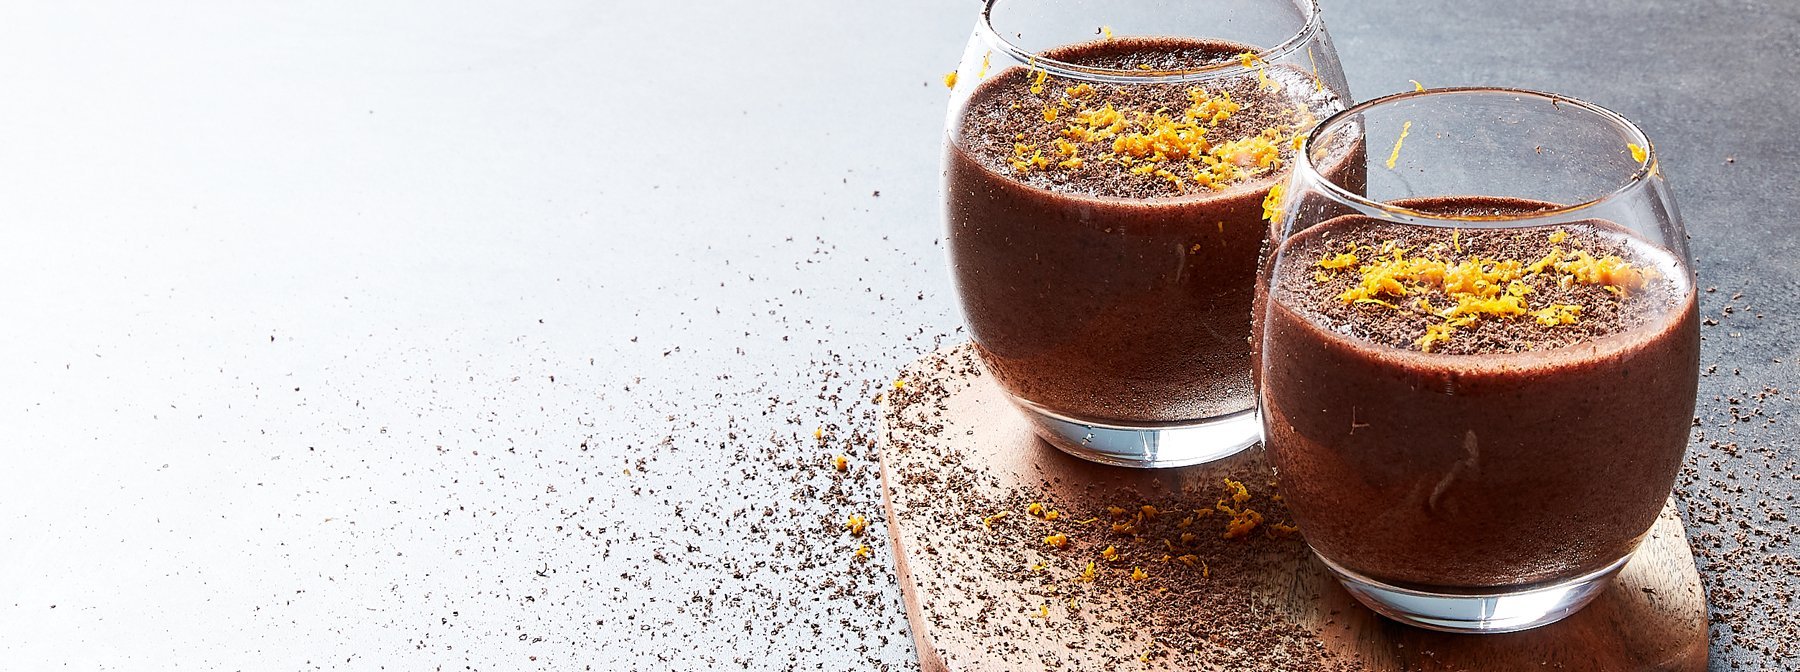 Protein Desserts | 11 High-Protein Desserts To Dig Into ASAP